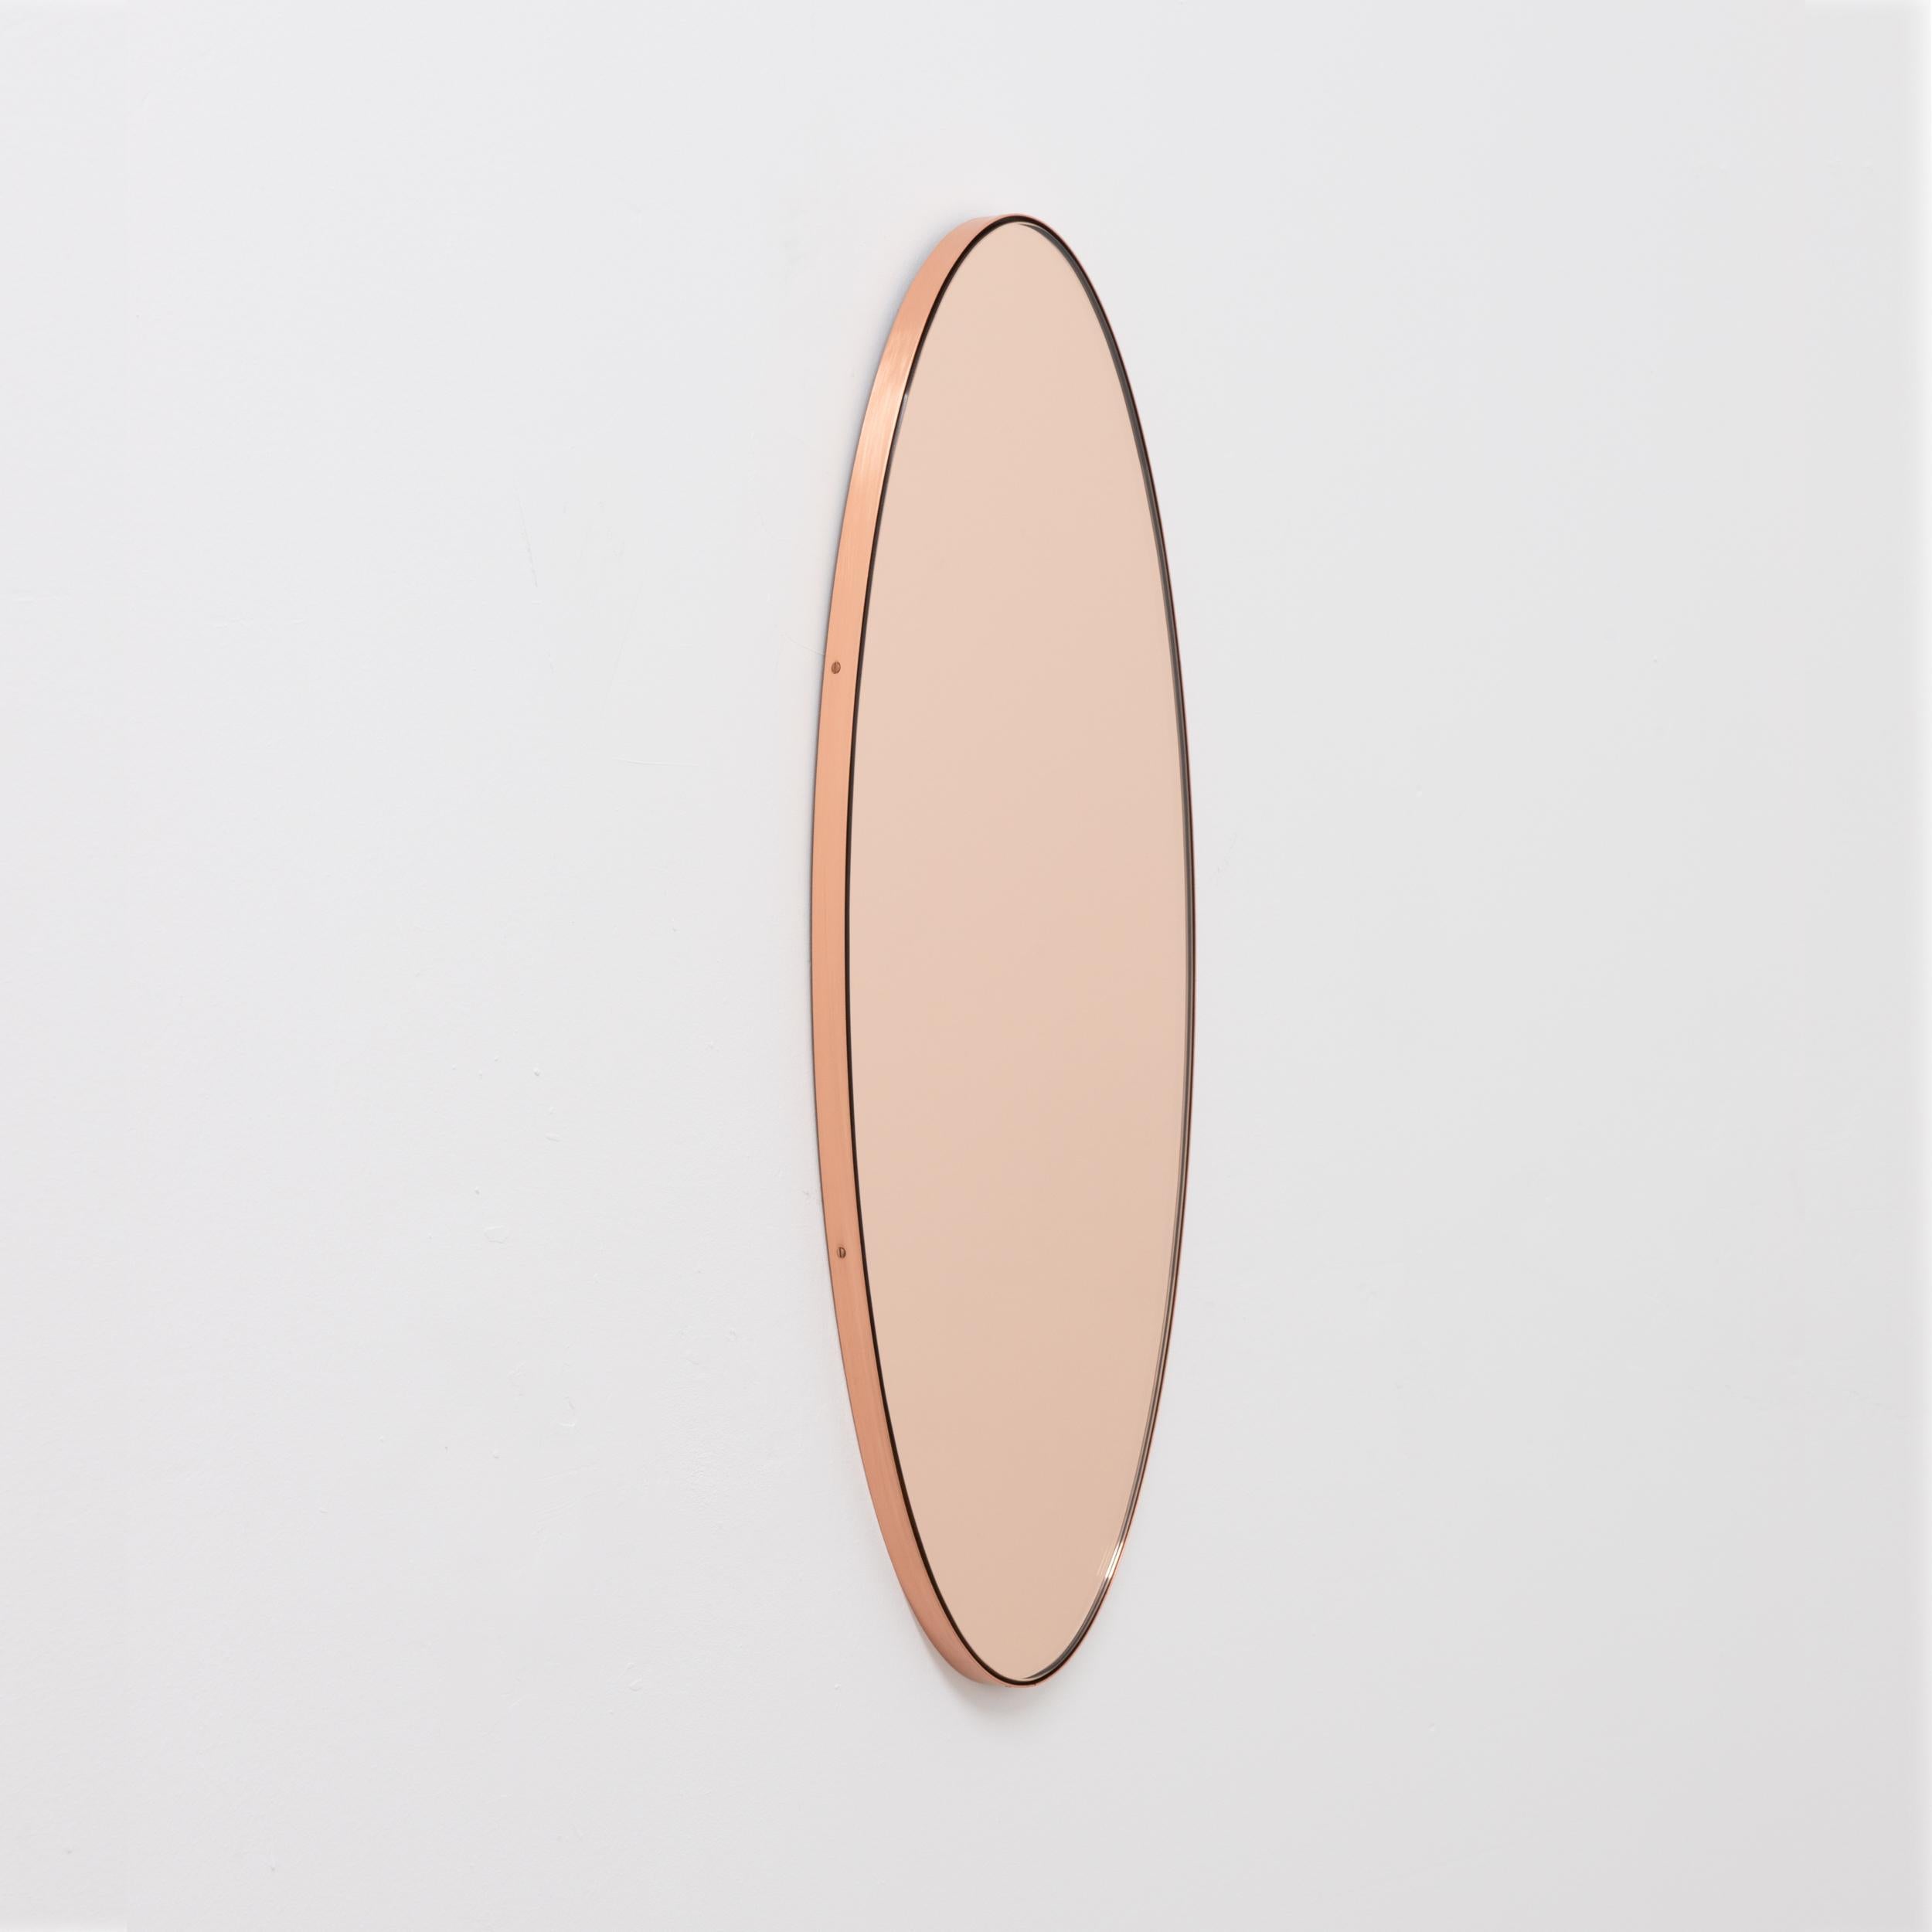 British In Stock Ovalis Oval Shaped Rose Gold Mirror with Copper Frame, Small For Sale